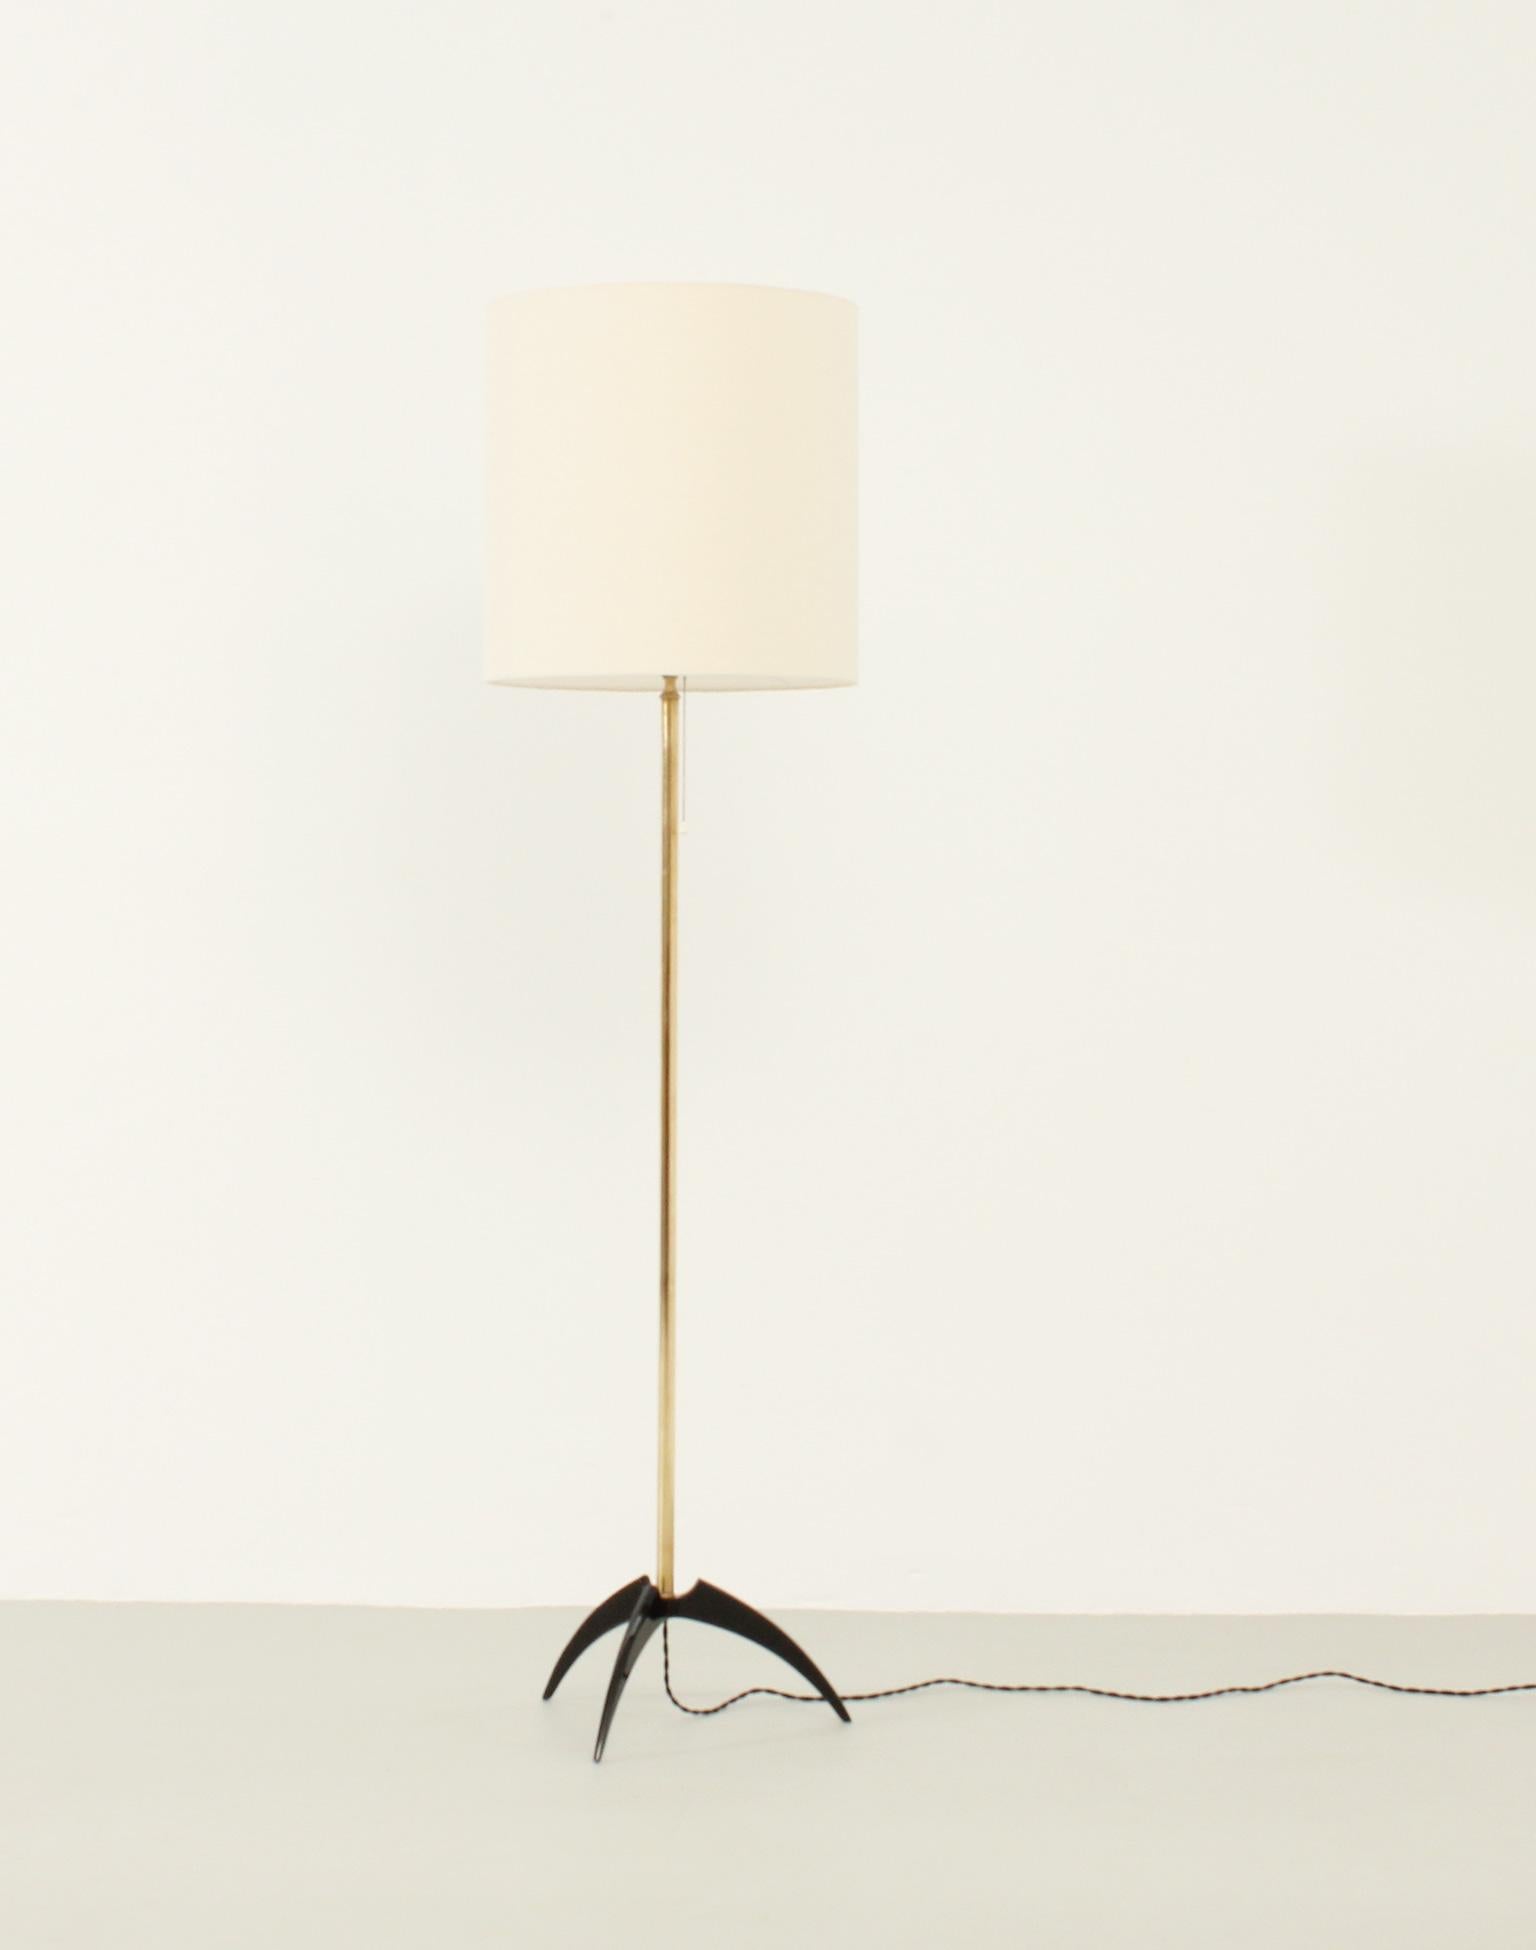 Elegant floor lamp in brass and black lacquered metal base, Spain, 1950's. Shade with new fabric.